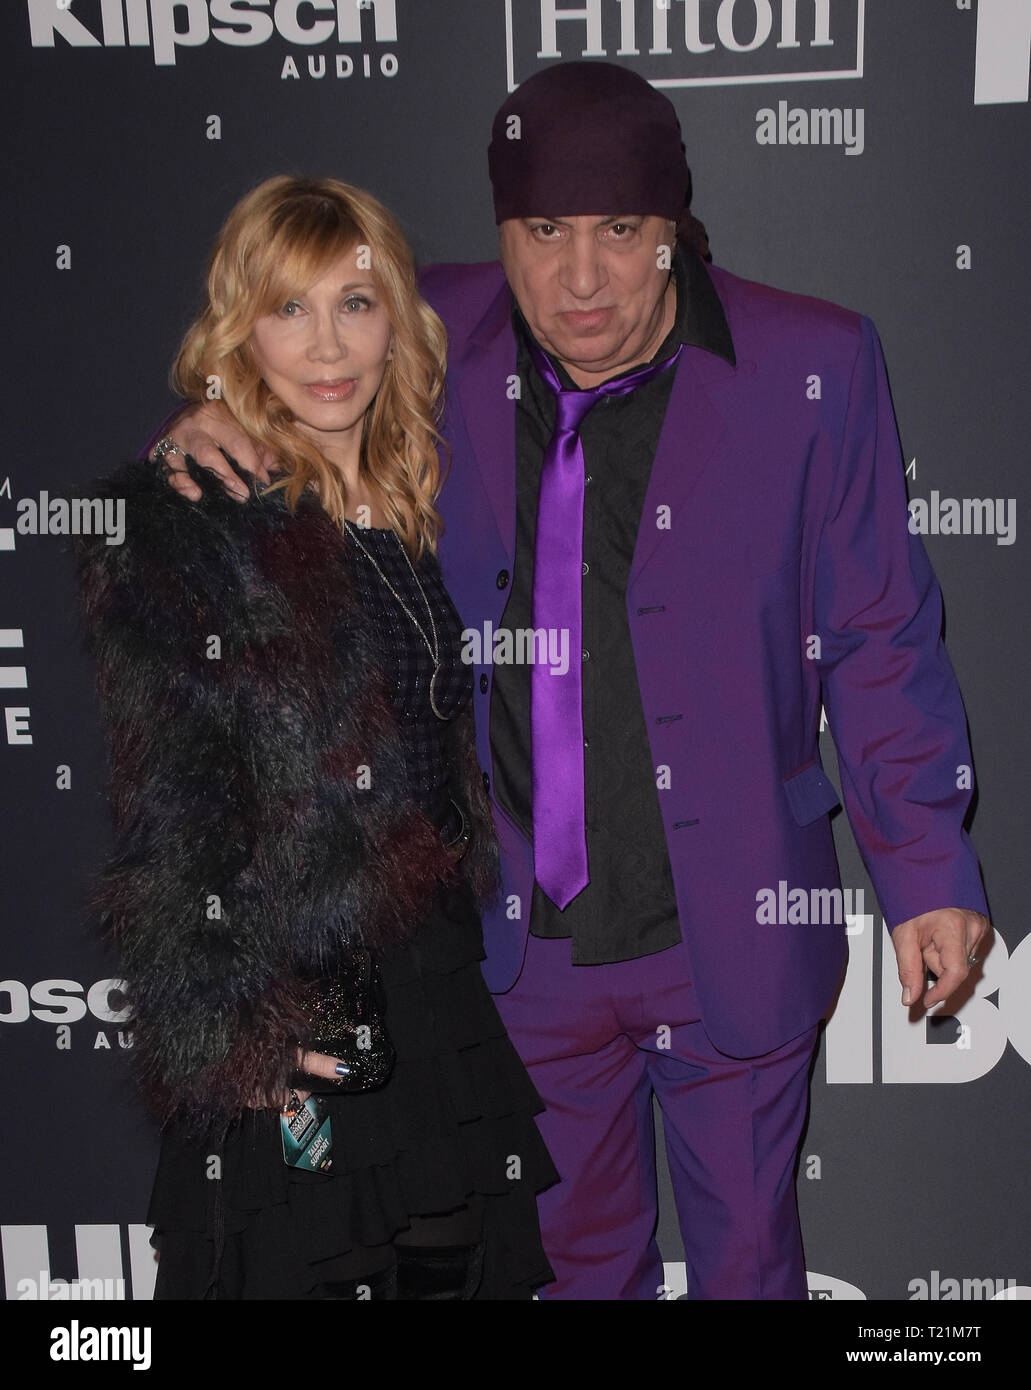 NEW YORK, NEW YORK - MARCH 29: Maureen Van Zandt, Steven Van Zandt attend the 2019 Rock & Roll Hall Of Fame Induction Ceremony at Barclays Center on March 29, 2019 in New York City. Photo: imageSPACE/MediaPunch Stock Photo